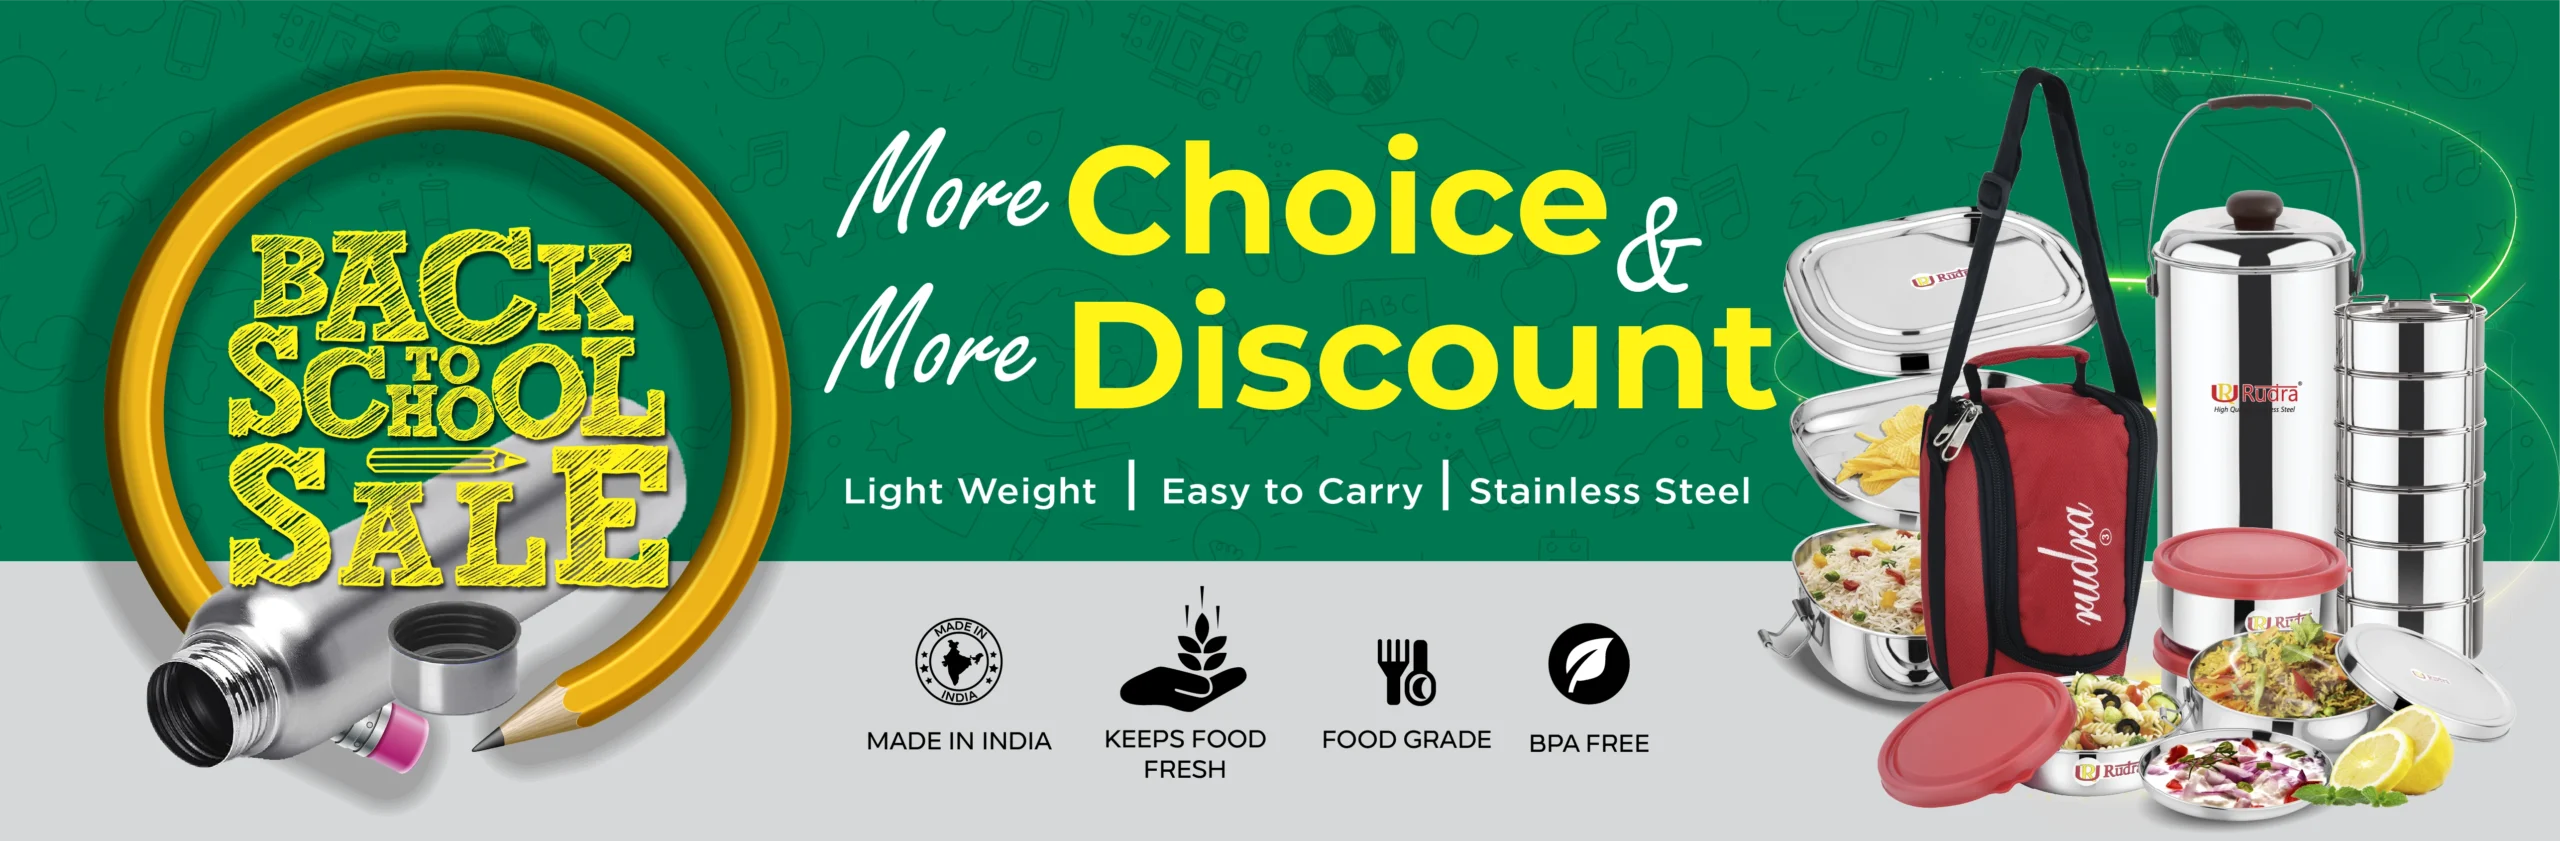 More Choice & More Discount